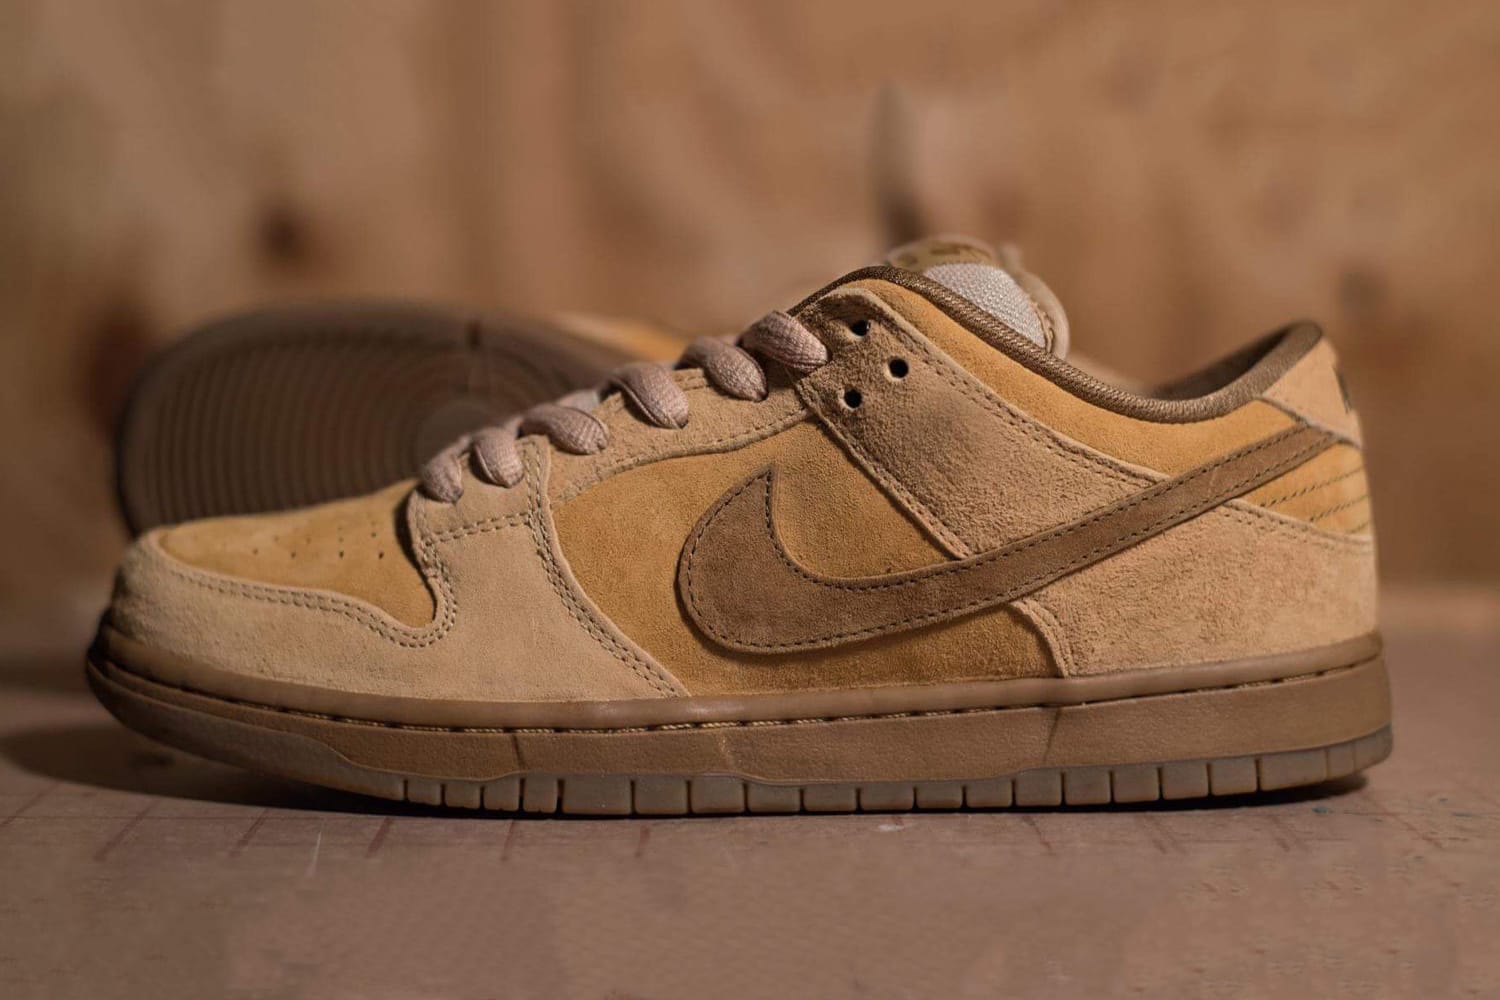 Nike SB Dunk Low Reese Forbes Wheat Is 